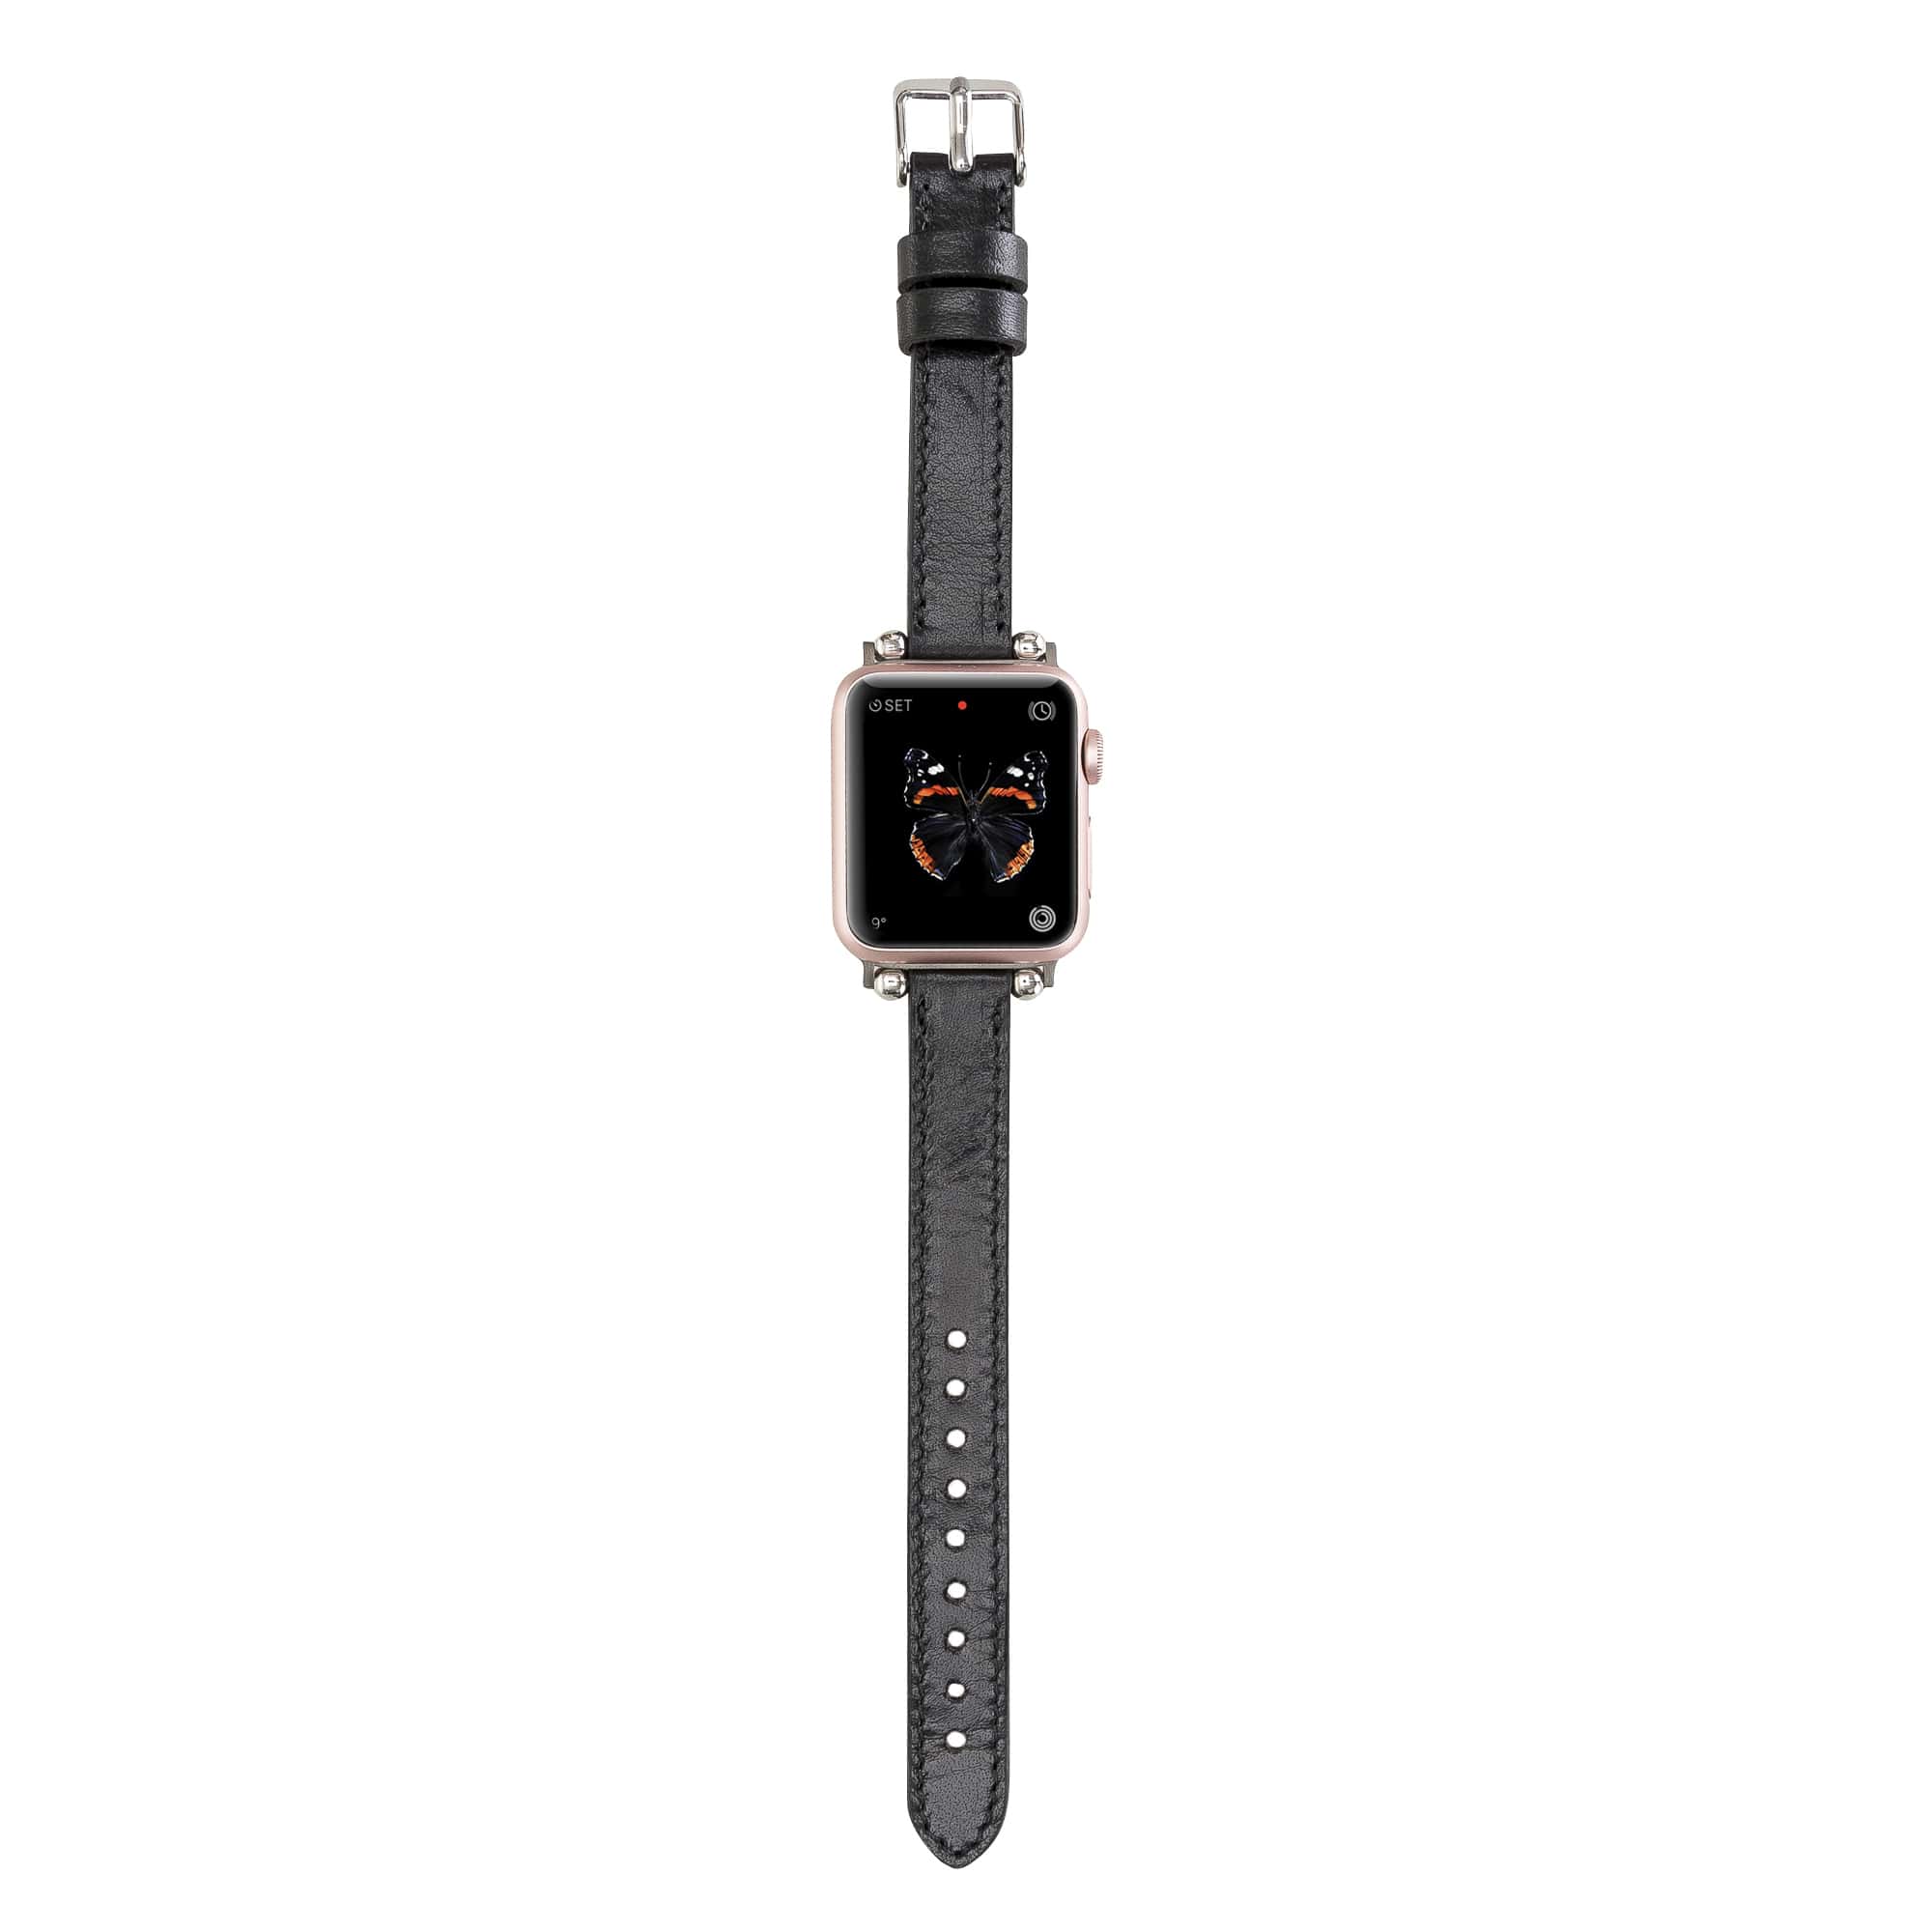 Sussex Black Genuine Leather Apple Watch Band Strap 38mm 40mm 42mm 44mm 45mm for All Series - Bomonti - 5